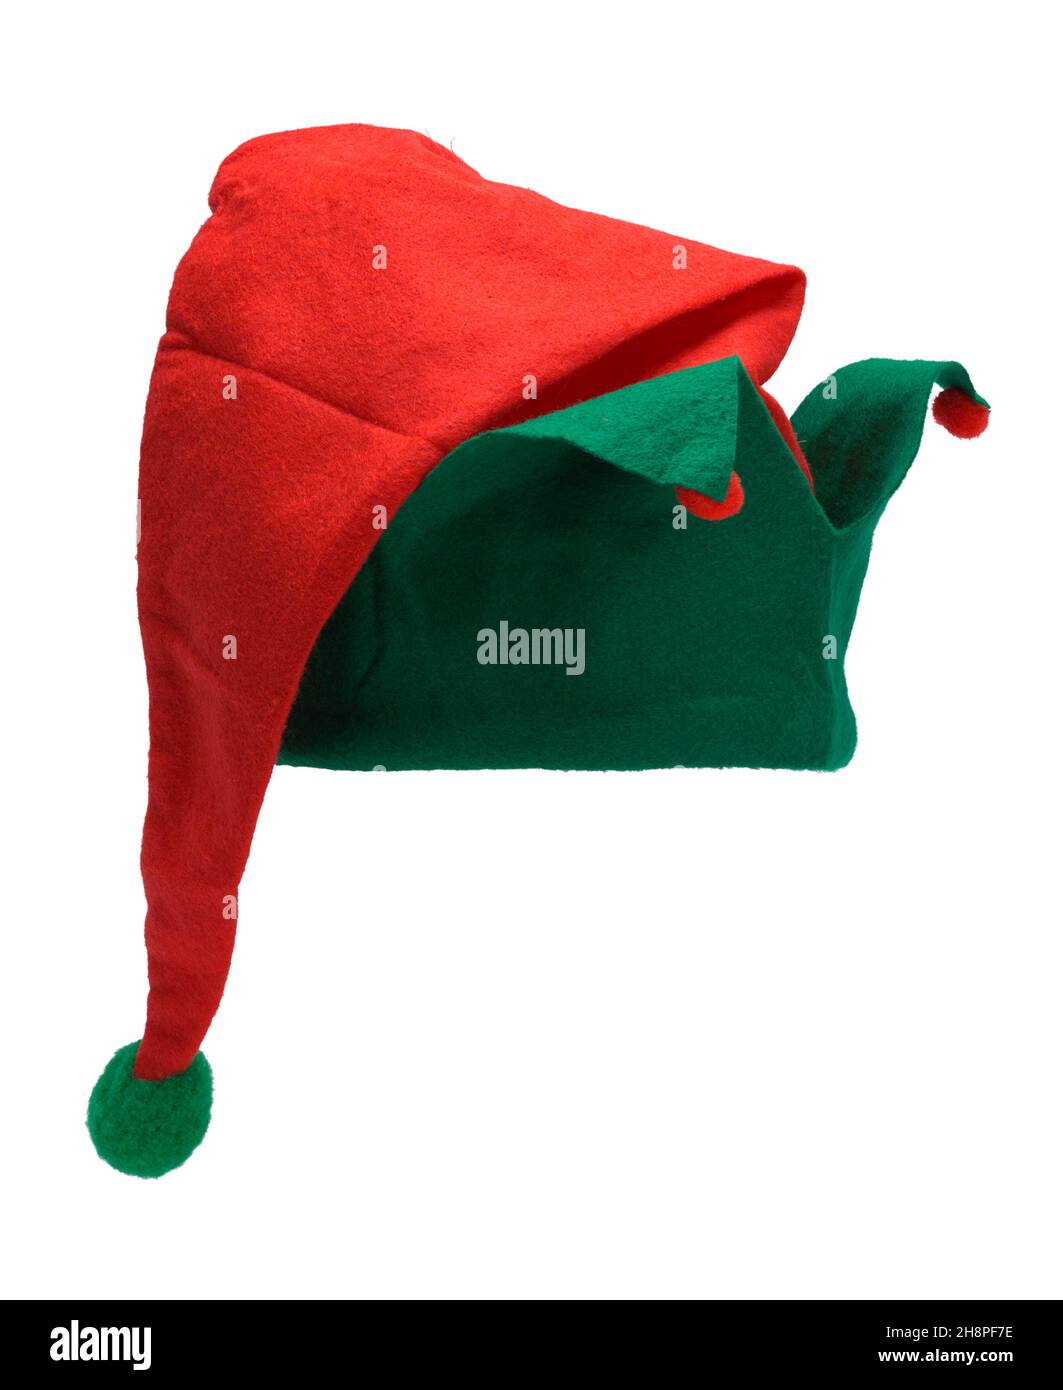 Felt Red and Green Elf Hat Cut Out. Stock Photo